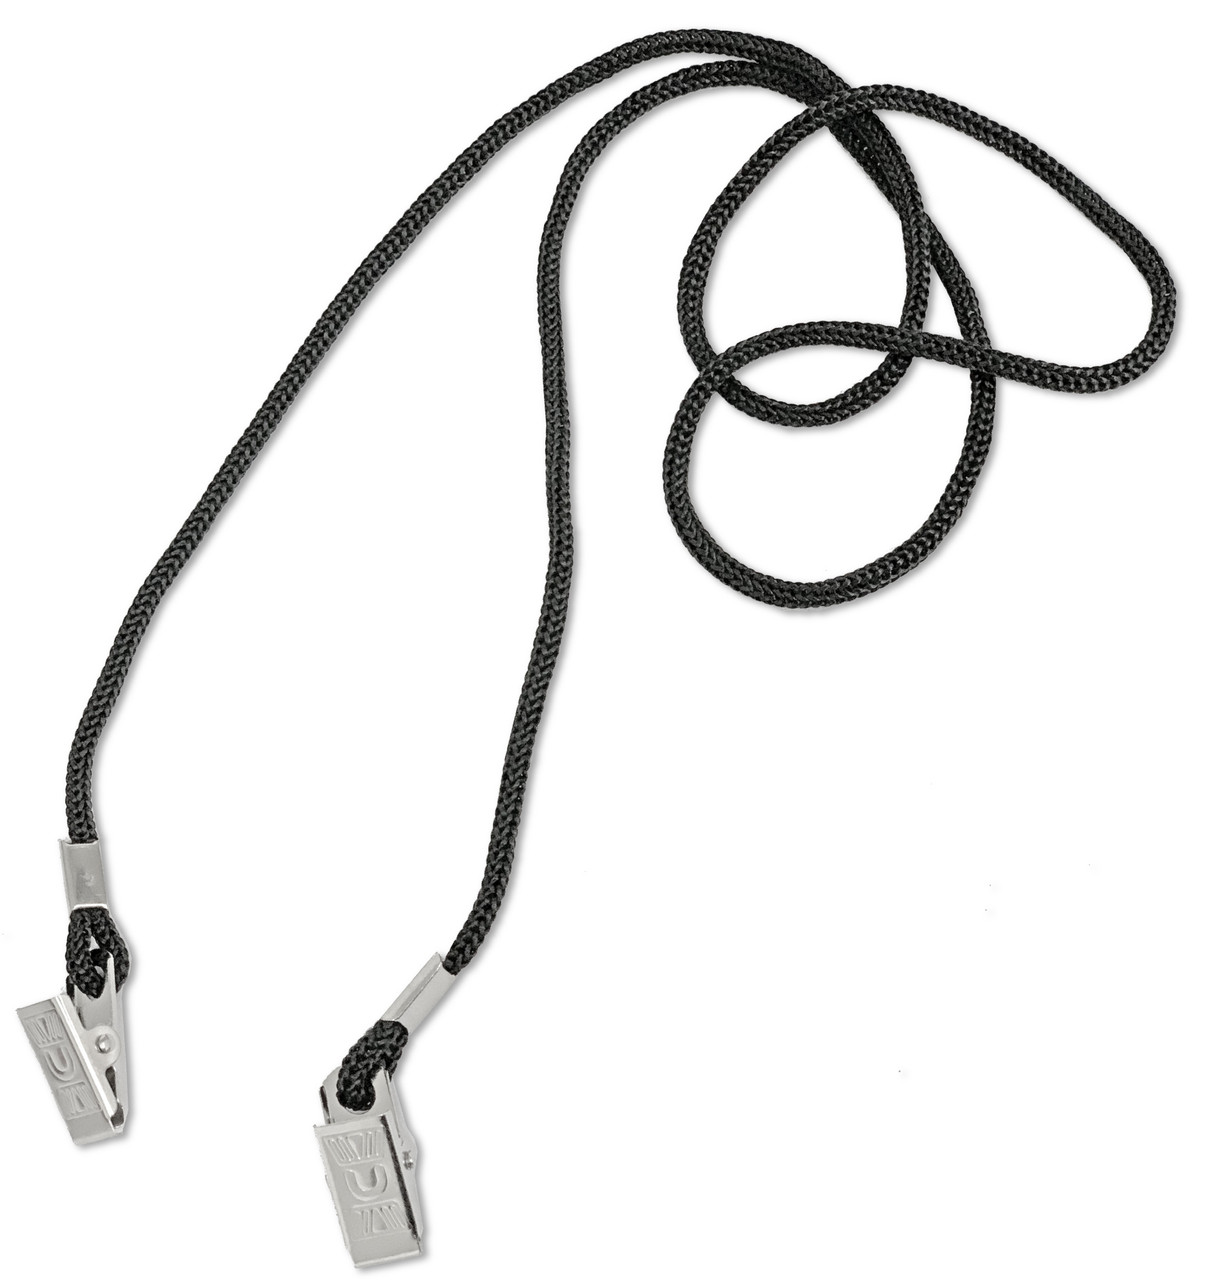 Thin Cord Open Ended Lanyard for Badge, BULLDOG CLIPS - Kenny Products